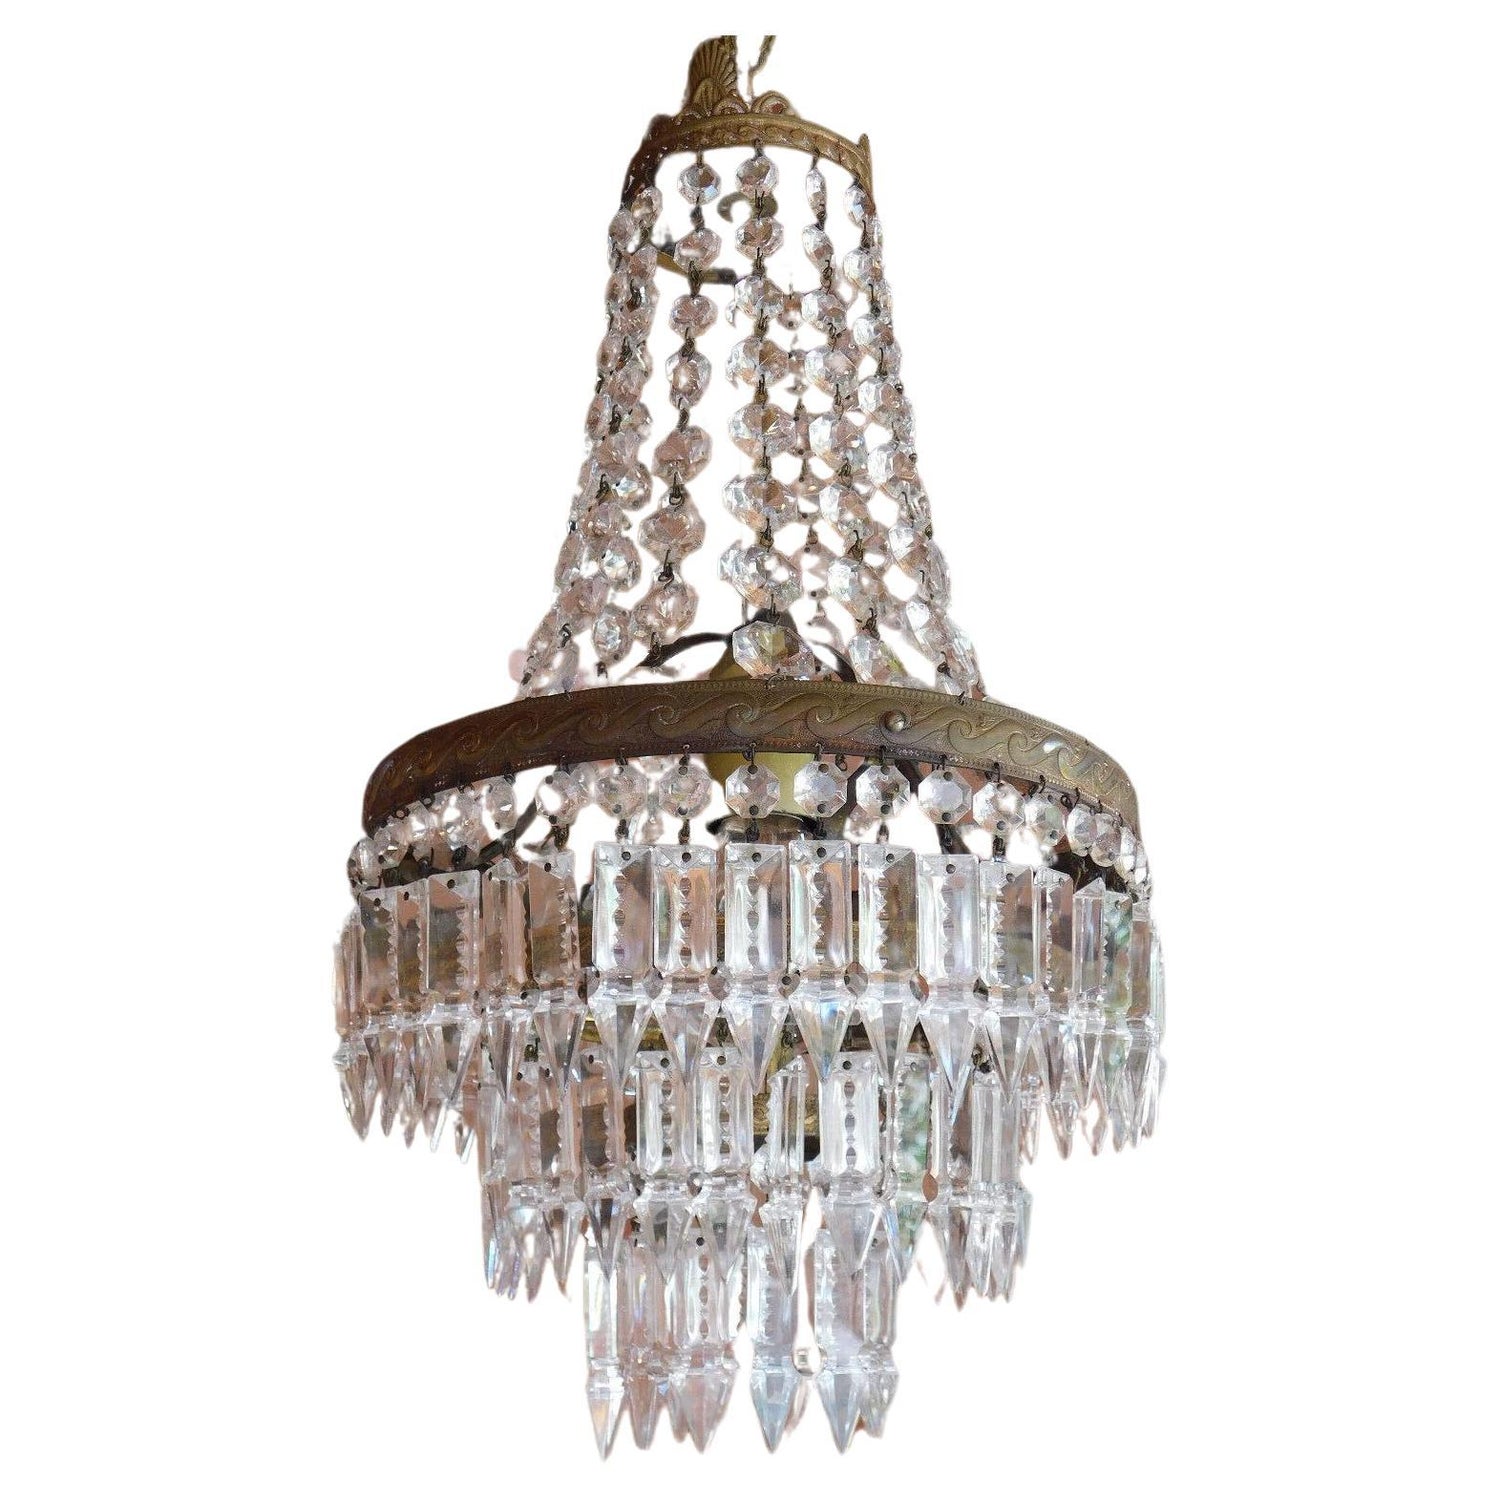 19thc French Empire Cascading Cut Crystal Chandelier attributed to